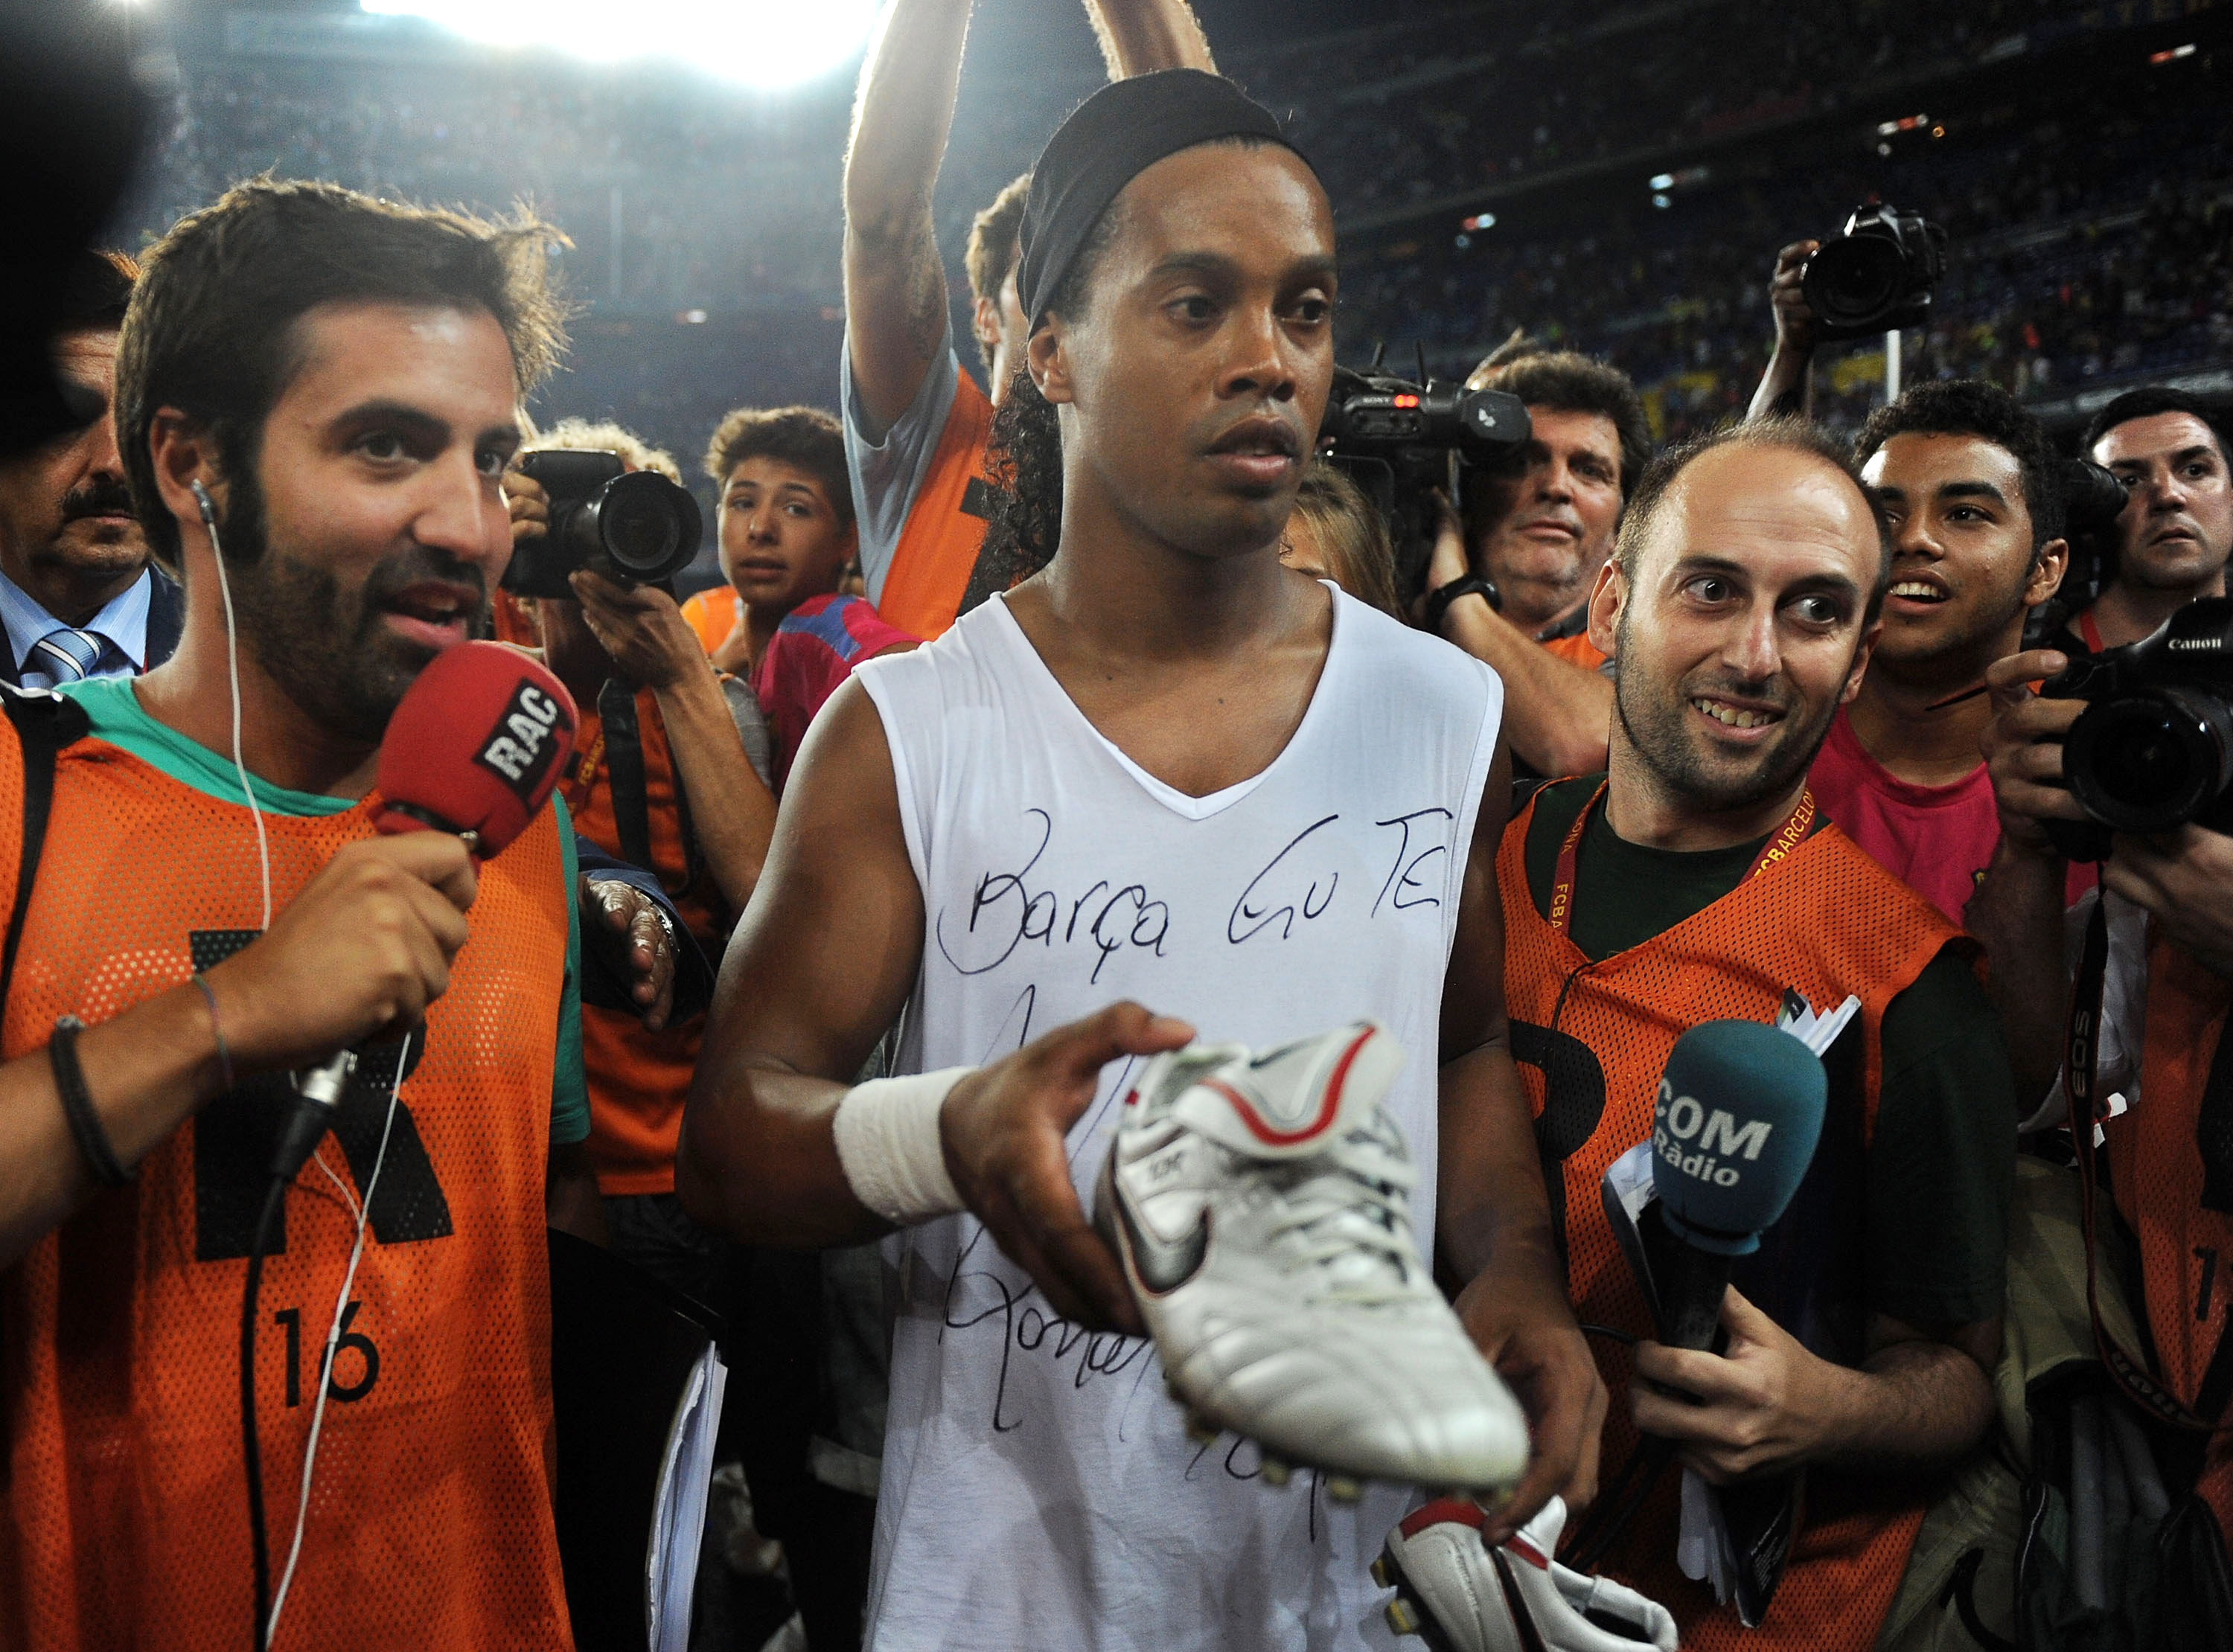 BARCELONA, SPAIN - AUGUST 25:  Ronaldinho of AC Milan and formerly of Barcelona gives away his boots to a fan at the Joan Gamper Trophy match between Barcelona and AC Milan at Camp Nou stadium on August 25, 2010 in Barcelona, Spain.  (Photo by Denis Doyle